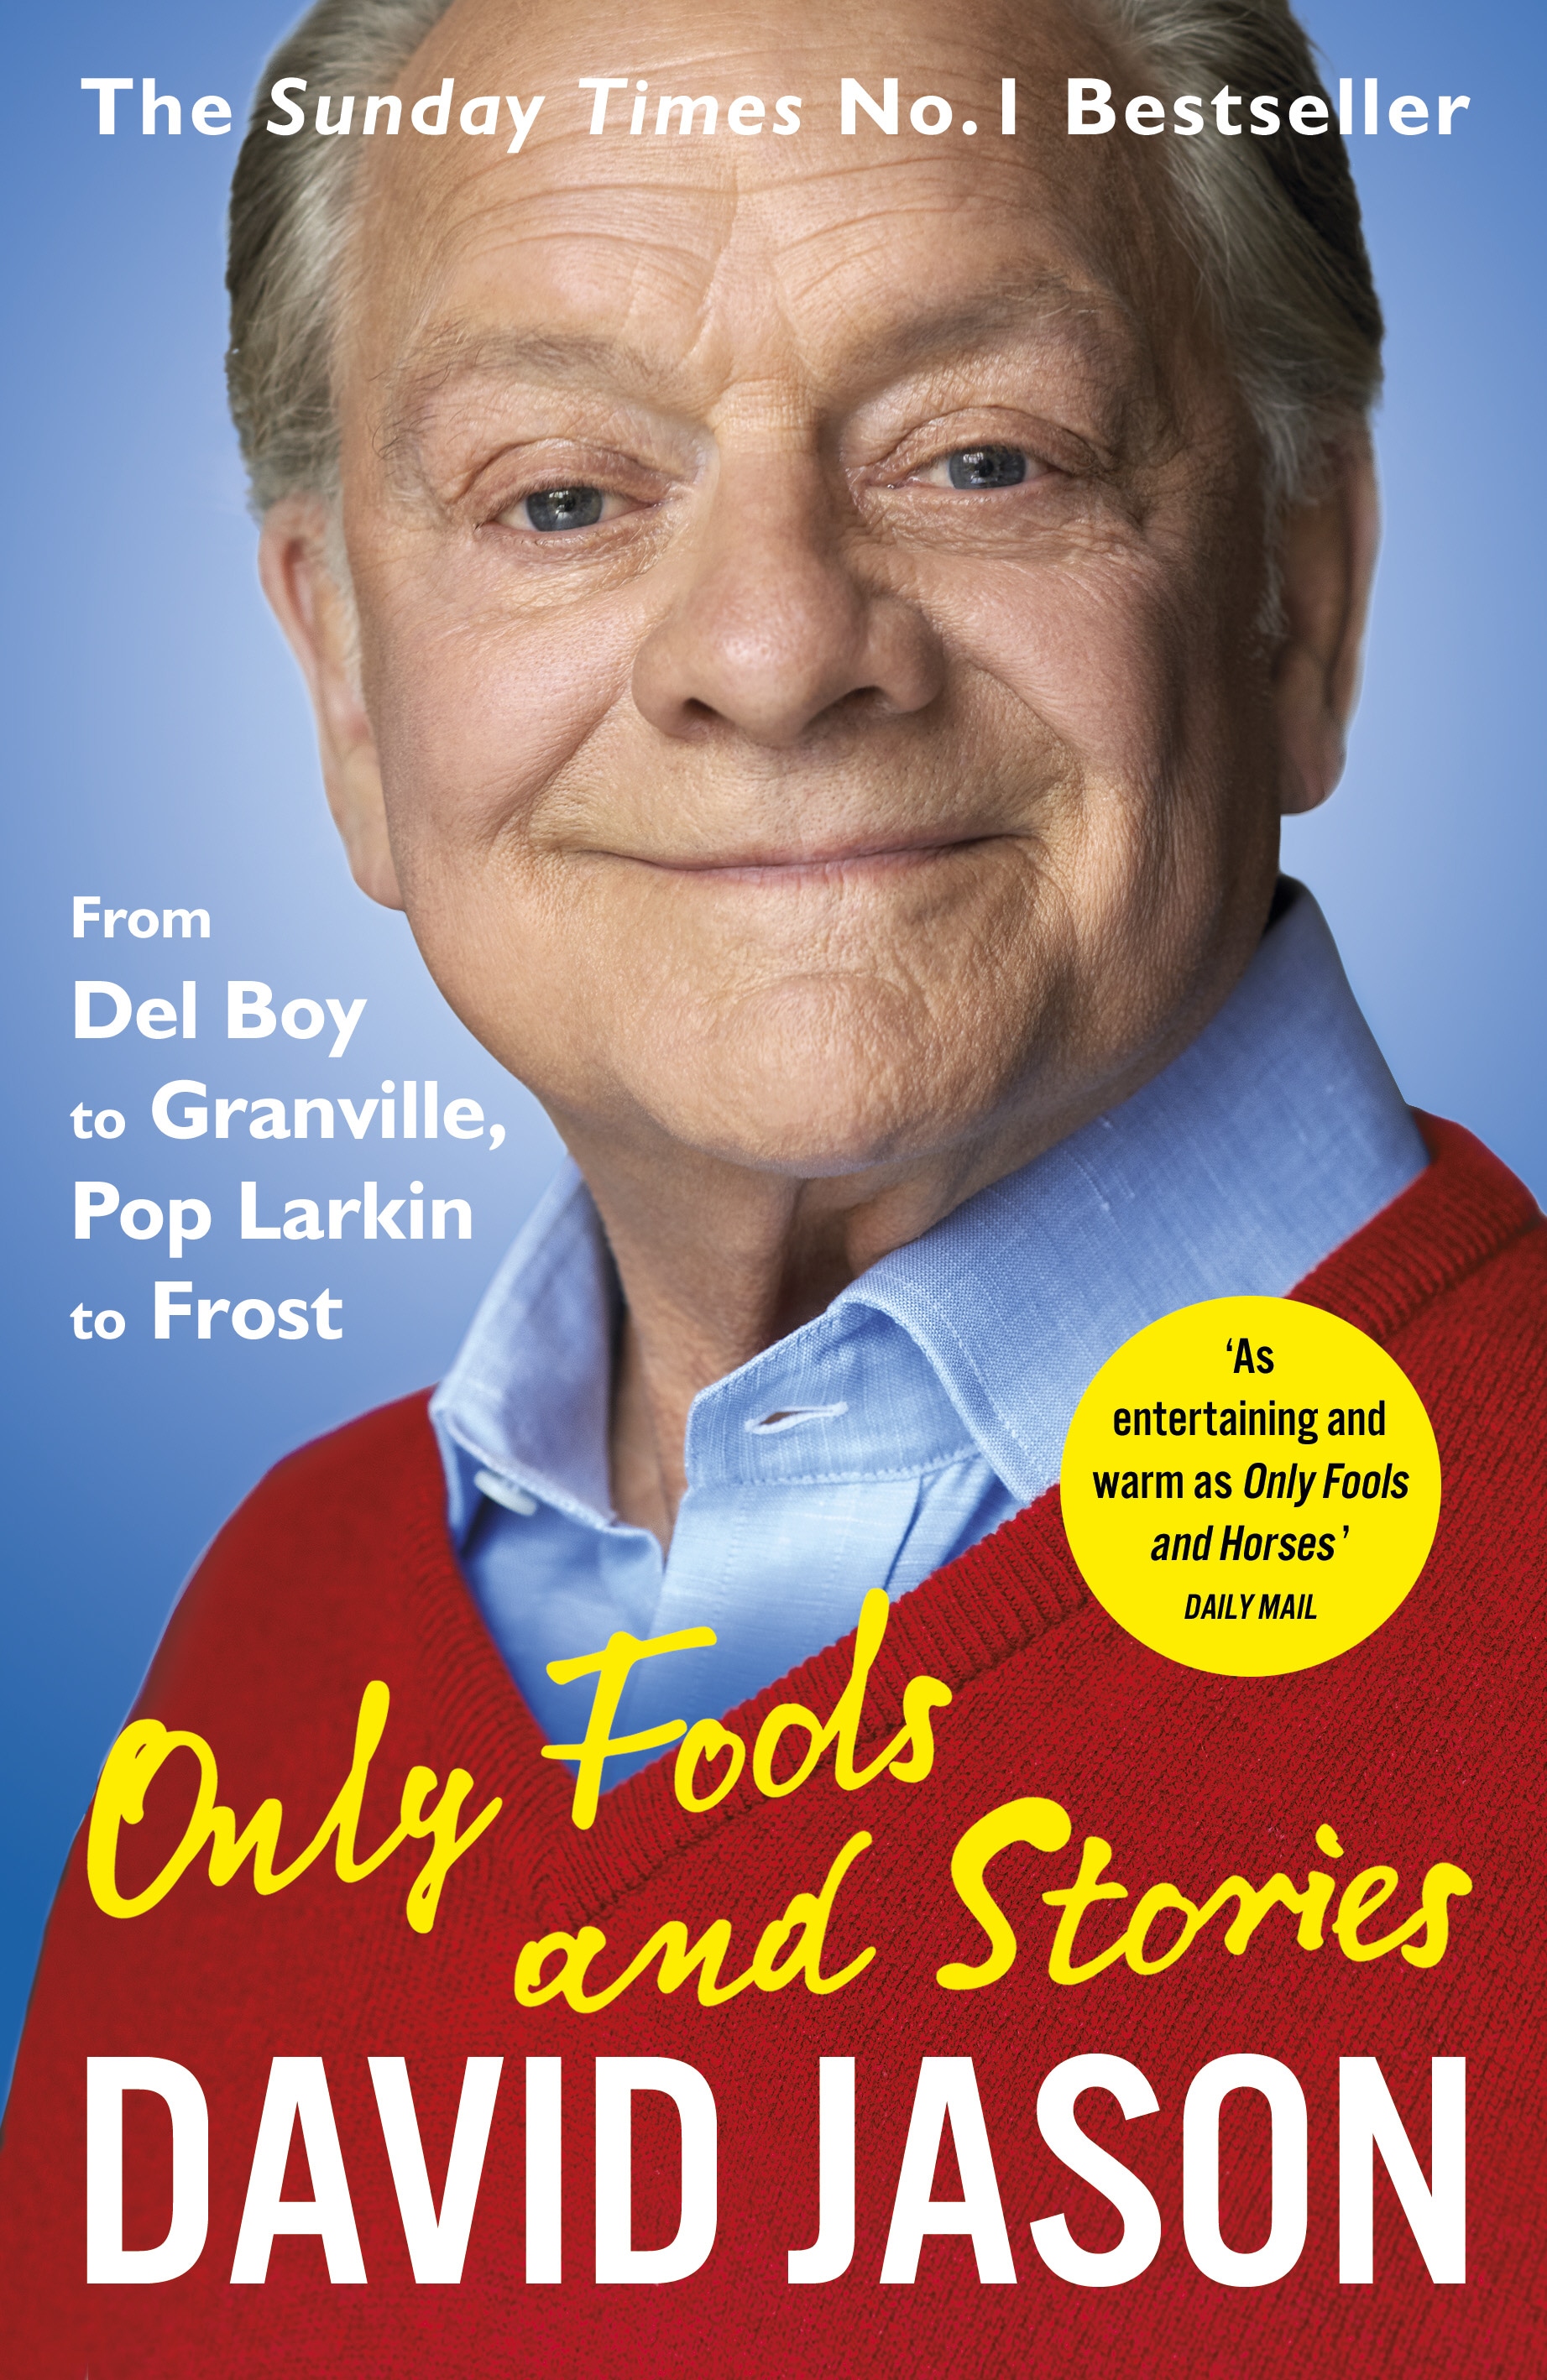 Book “Only Fools and Stories” by David Jason — May 31, 2018